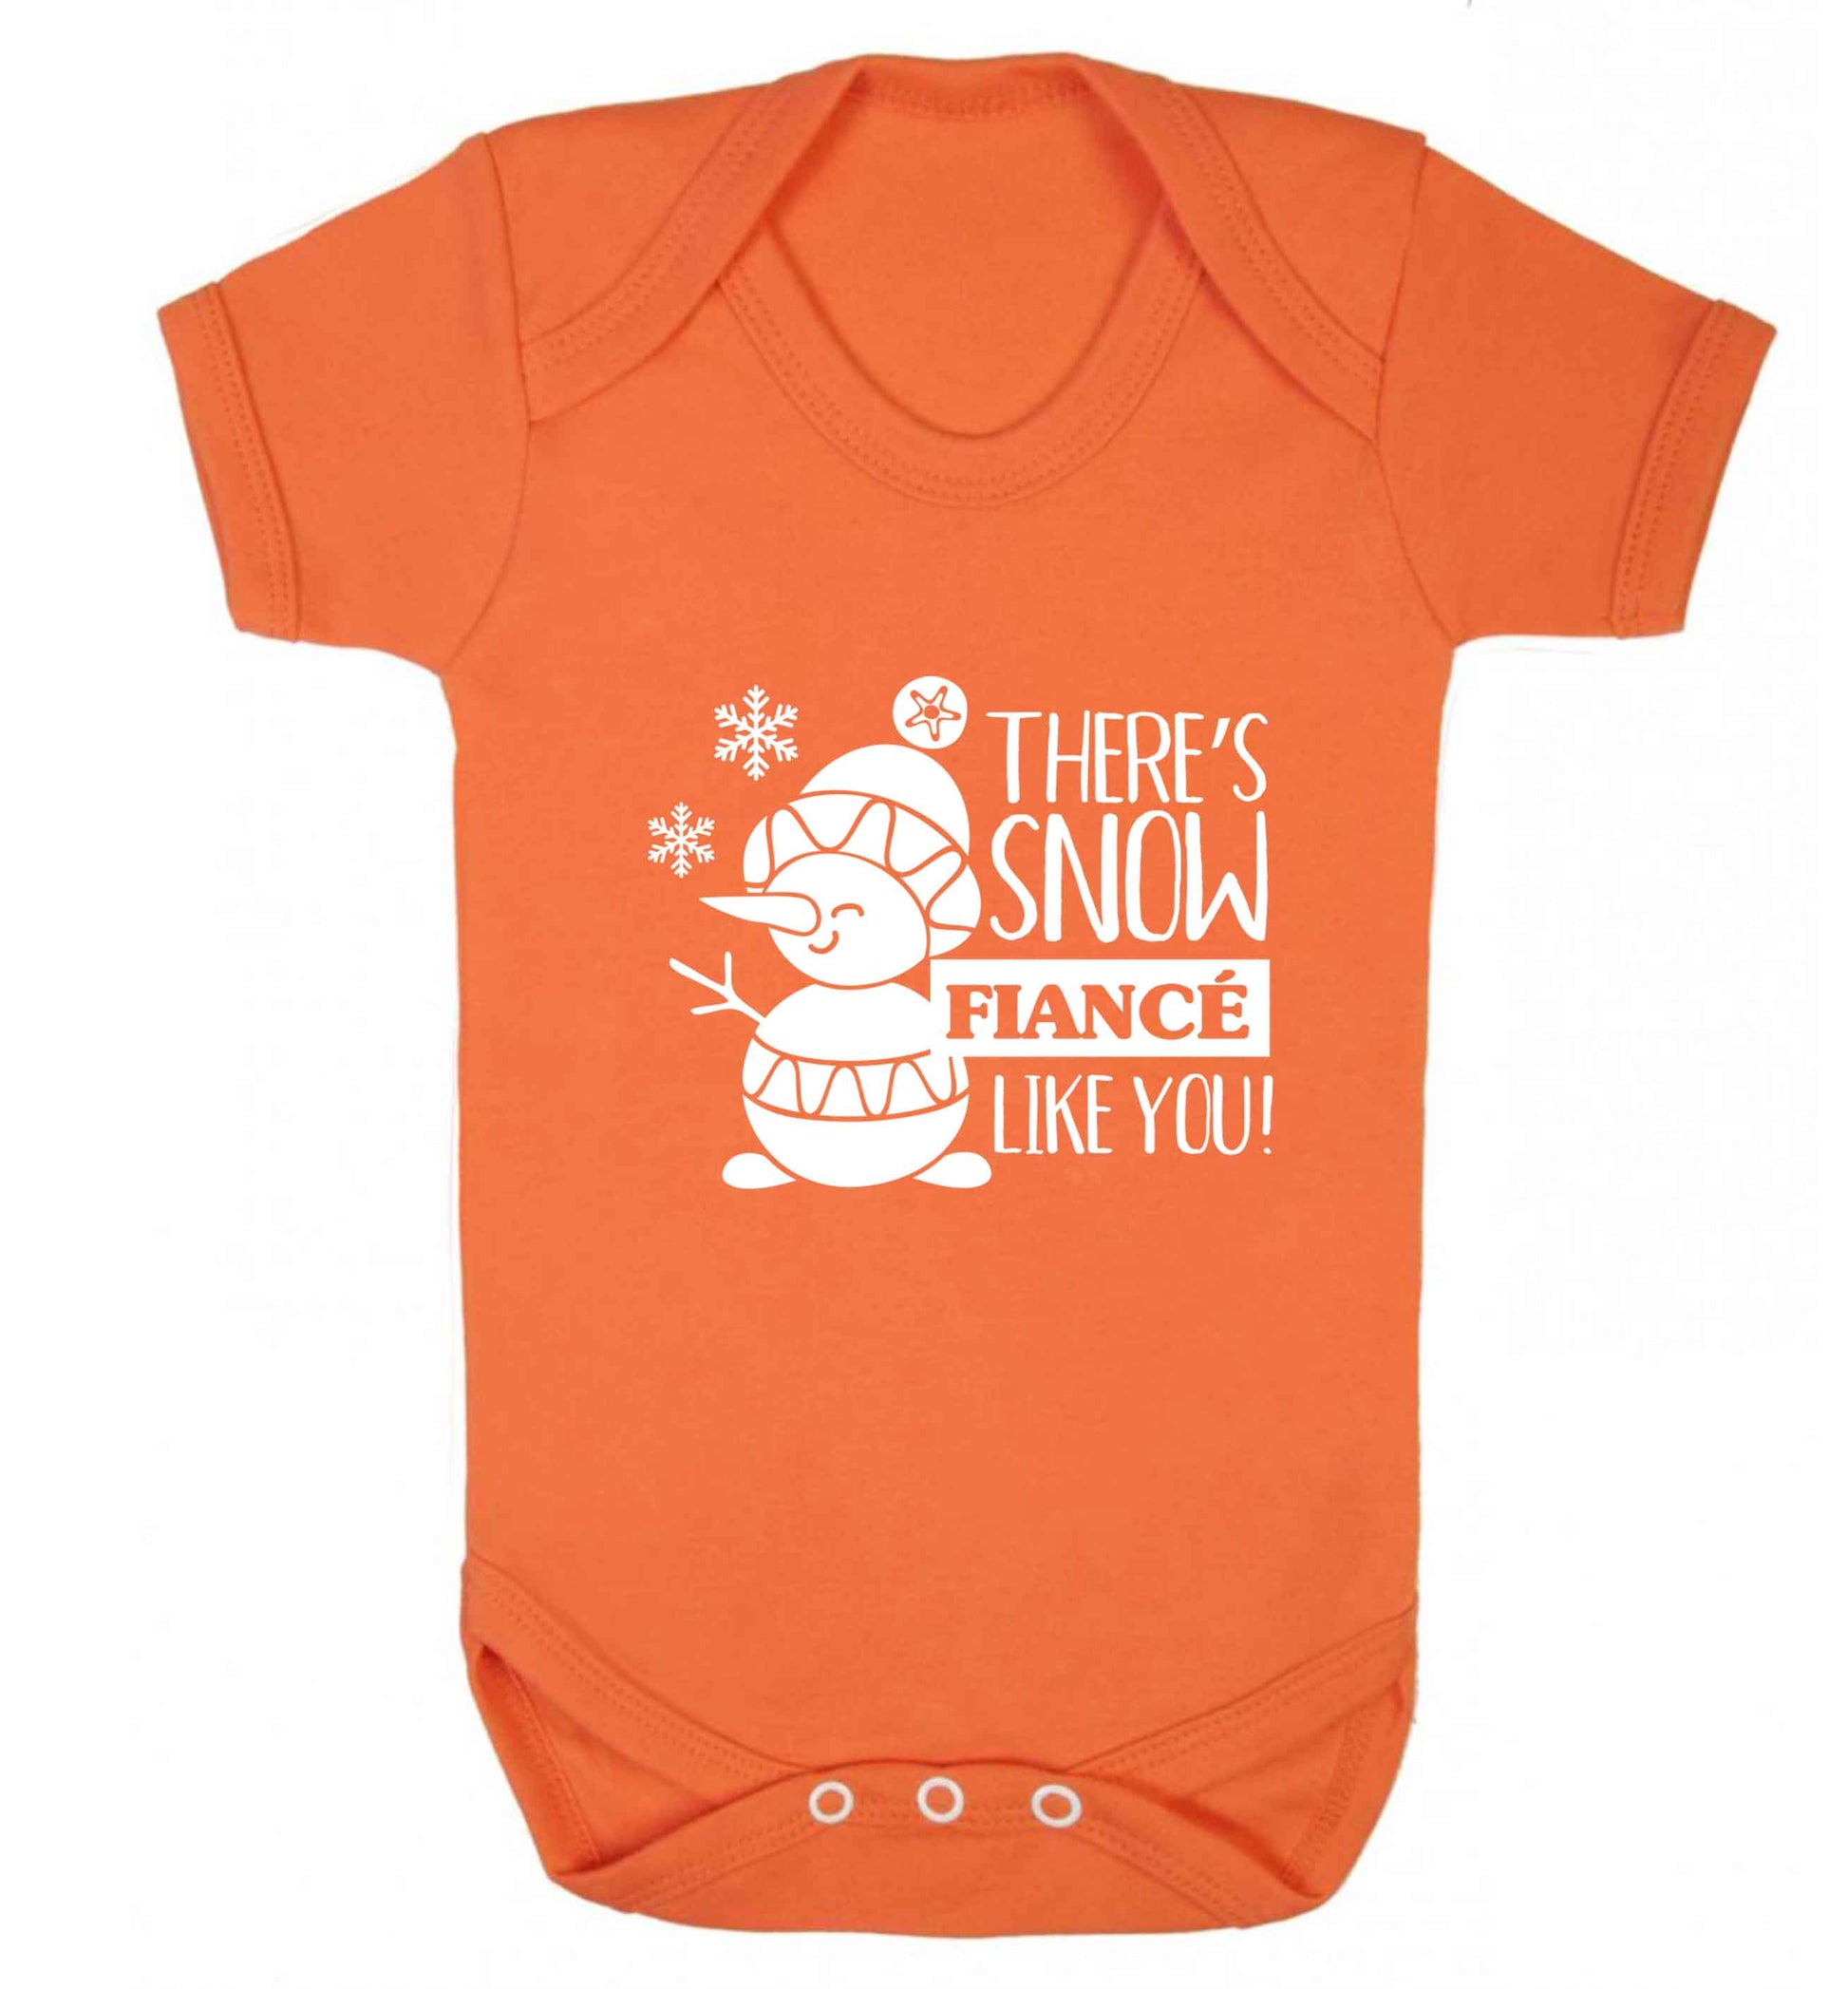 There's snow fiance like you baby vest orange 18-24 months